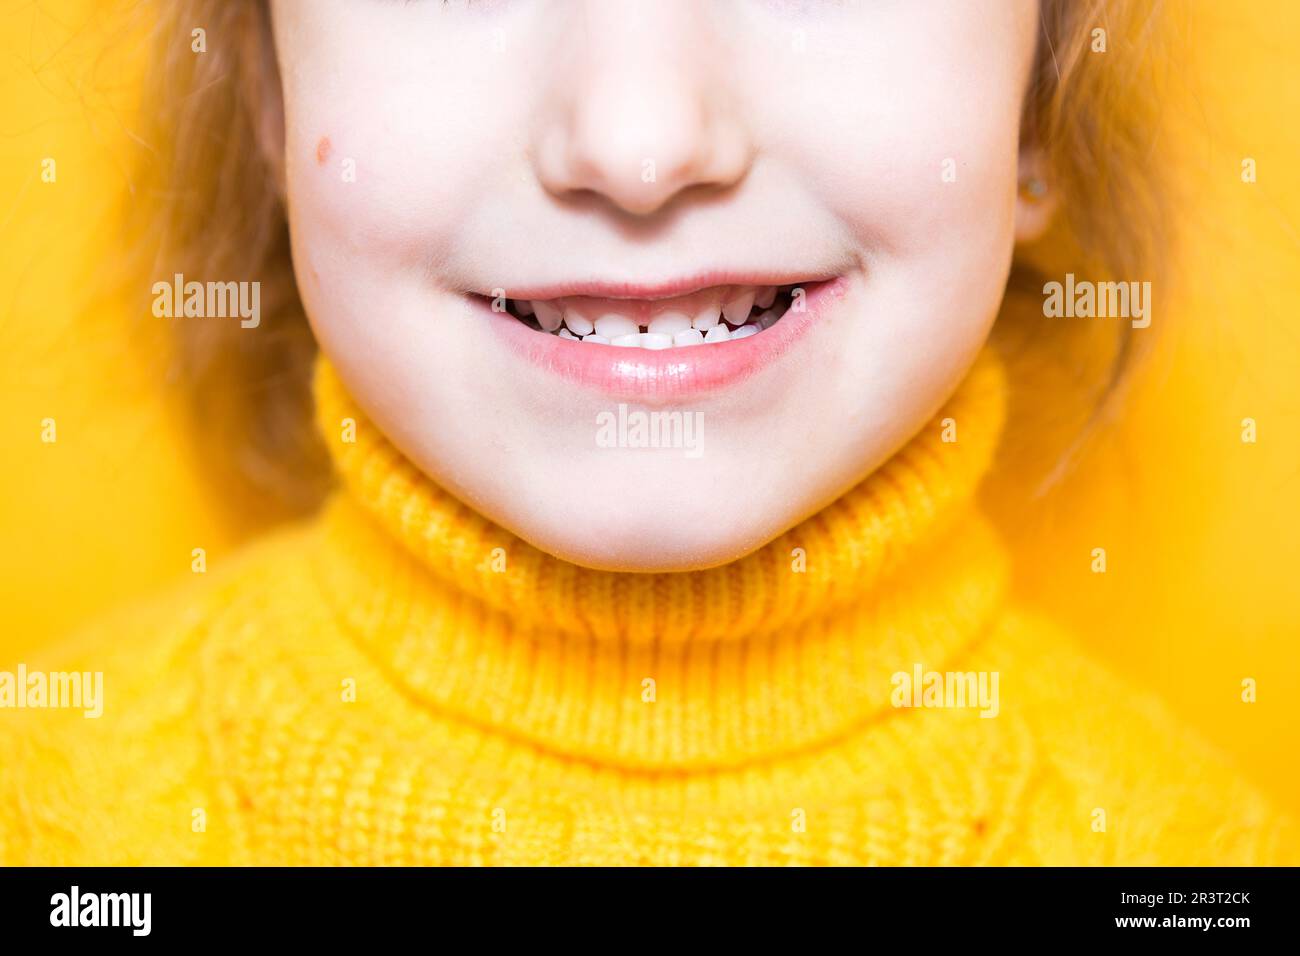 Girl shows her teeth-pathological bite, malocclusion, overbite. Pediatric dentistry and periodontics, bite correction. Health an Stock Photo